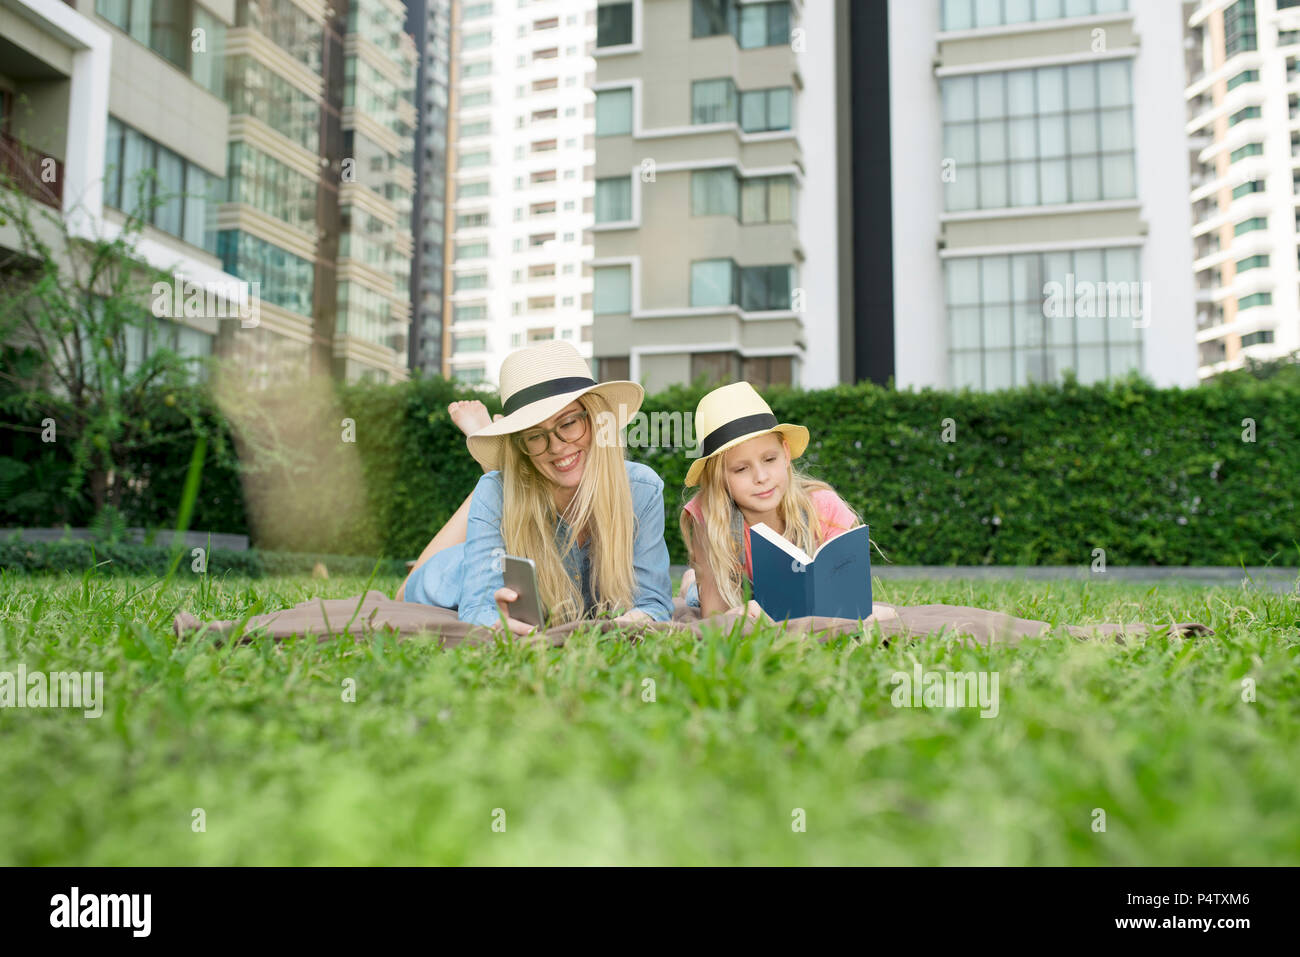 Happy mother and daughter with book and smartphone in urban city garden Stock Photo